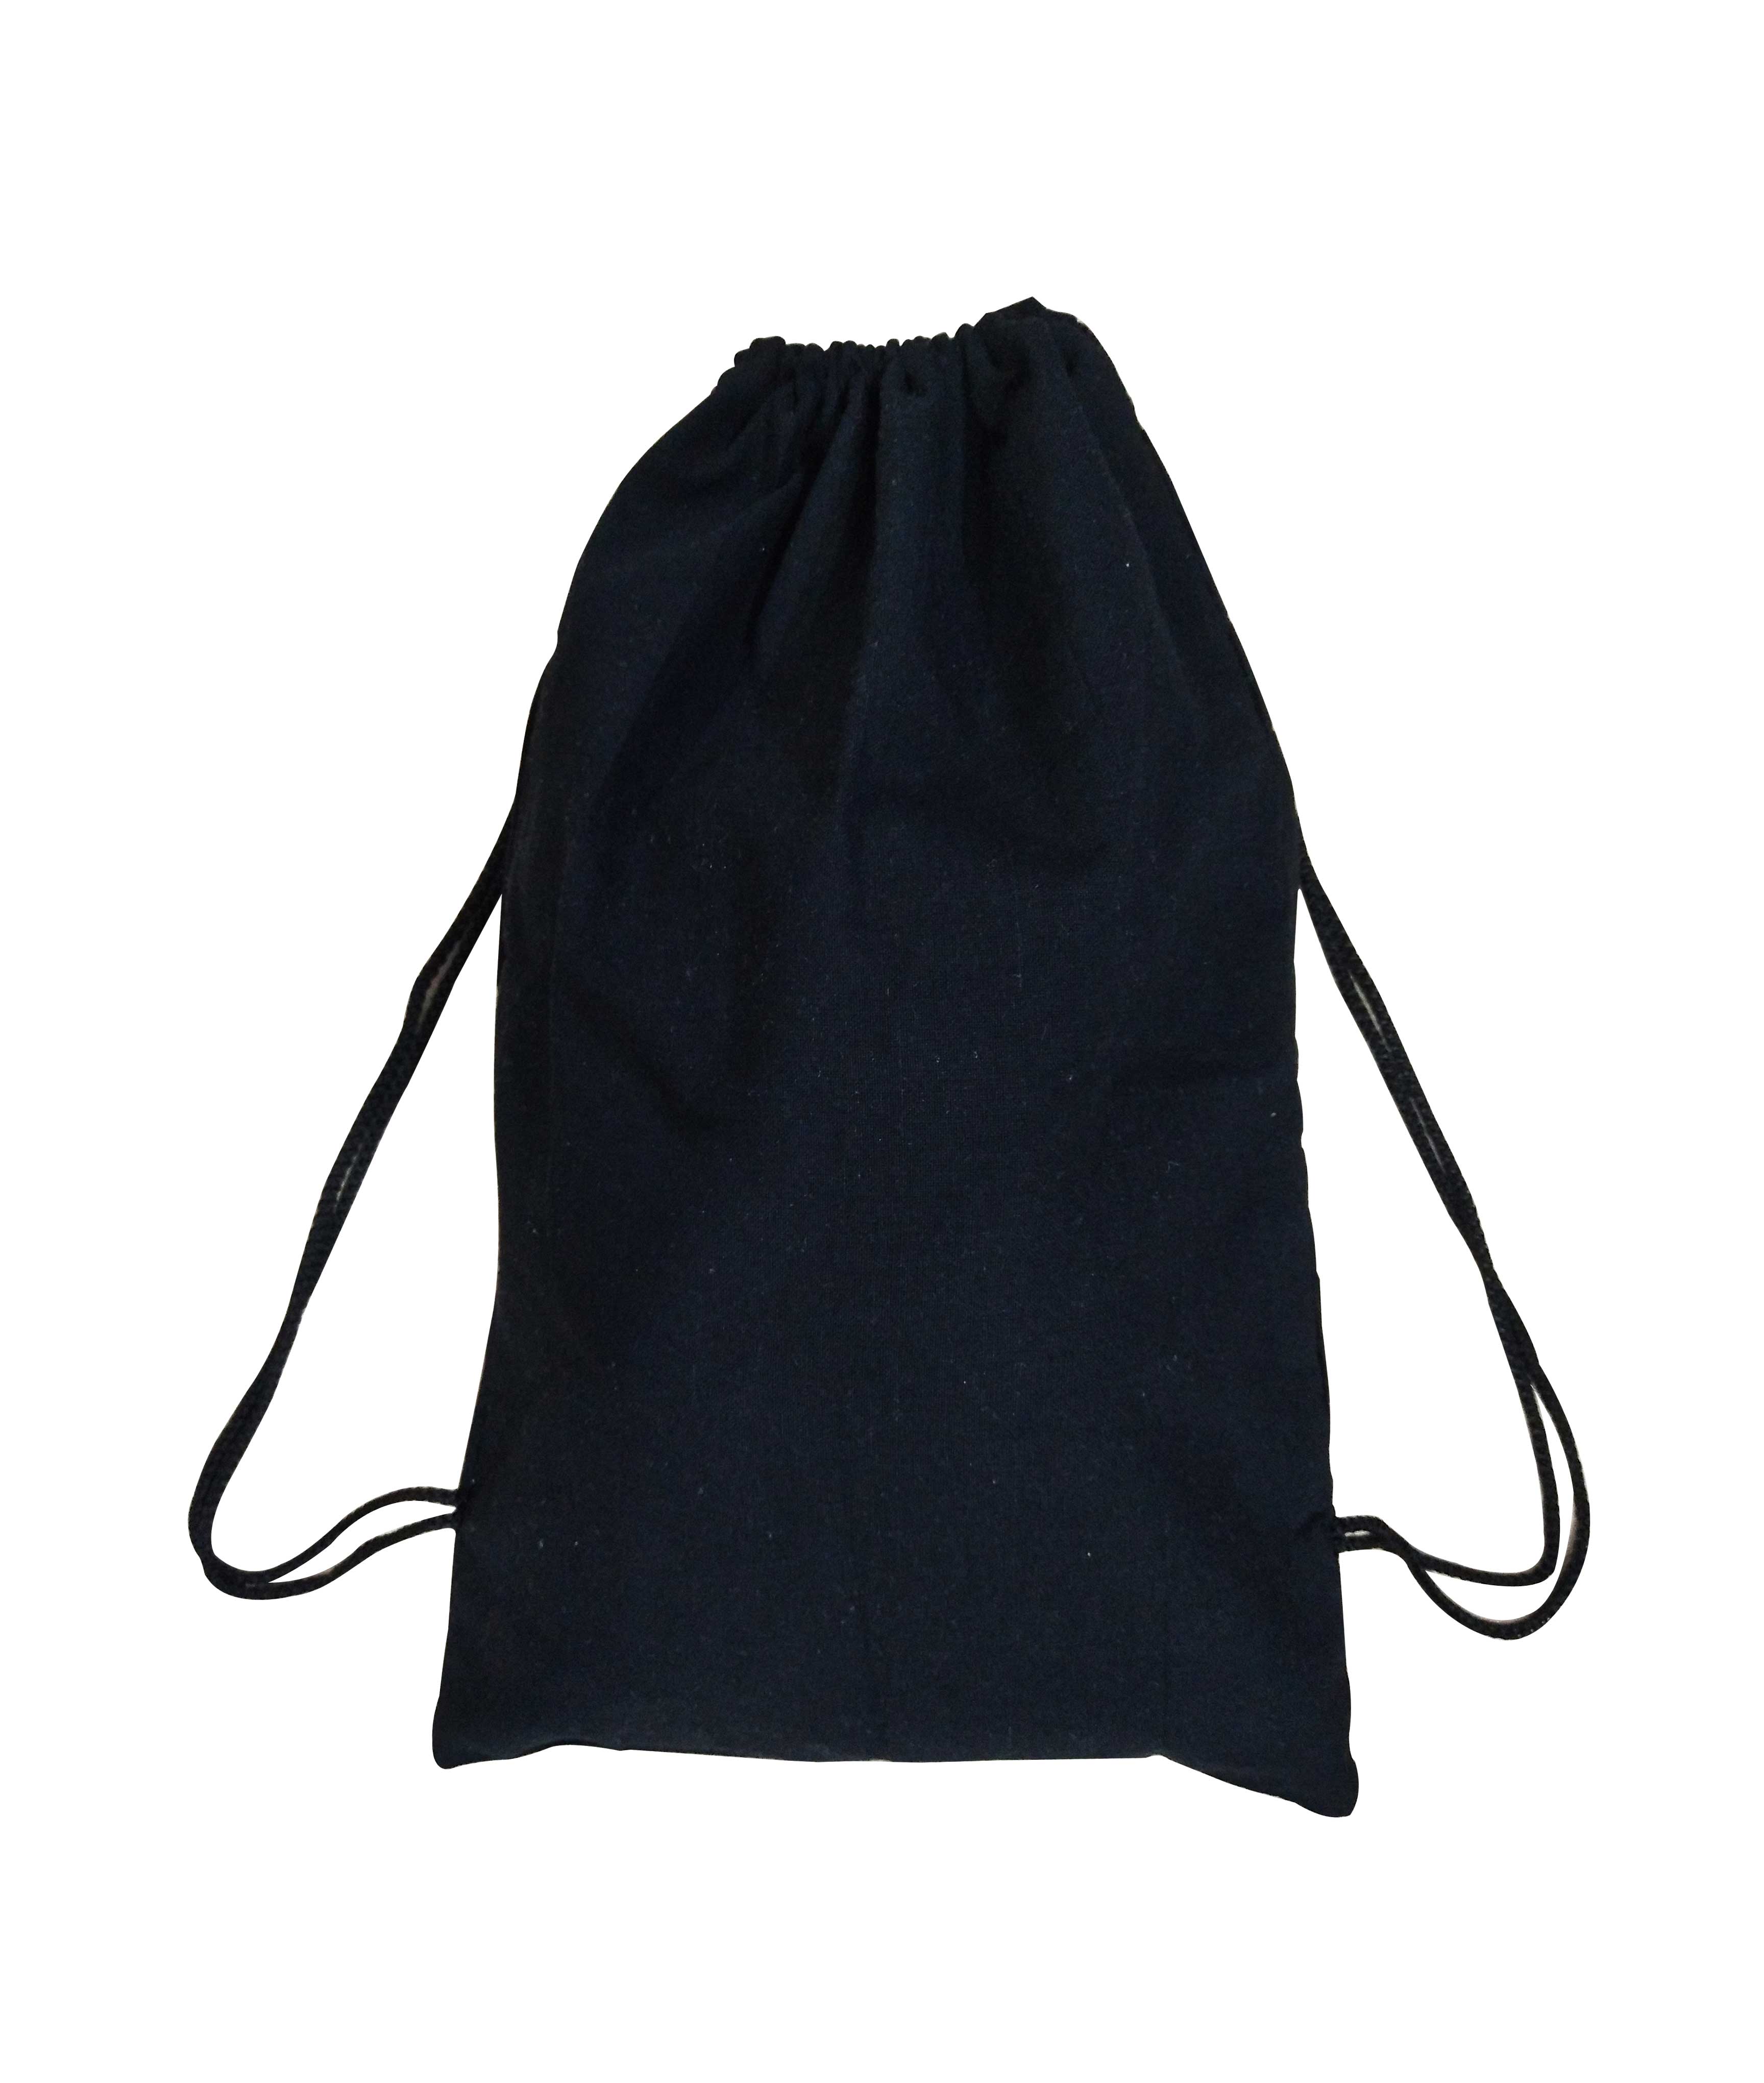 Black Cotton Drawstring Bags Or Sacks From Stock In Packs 10